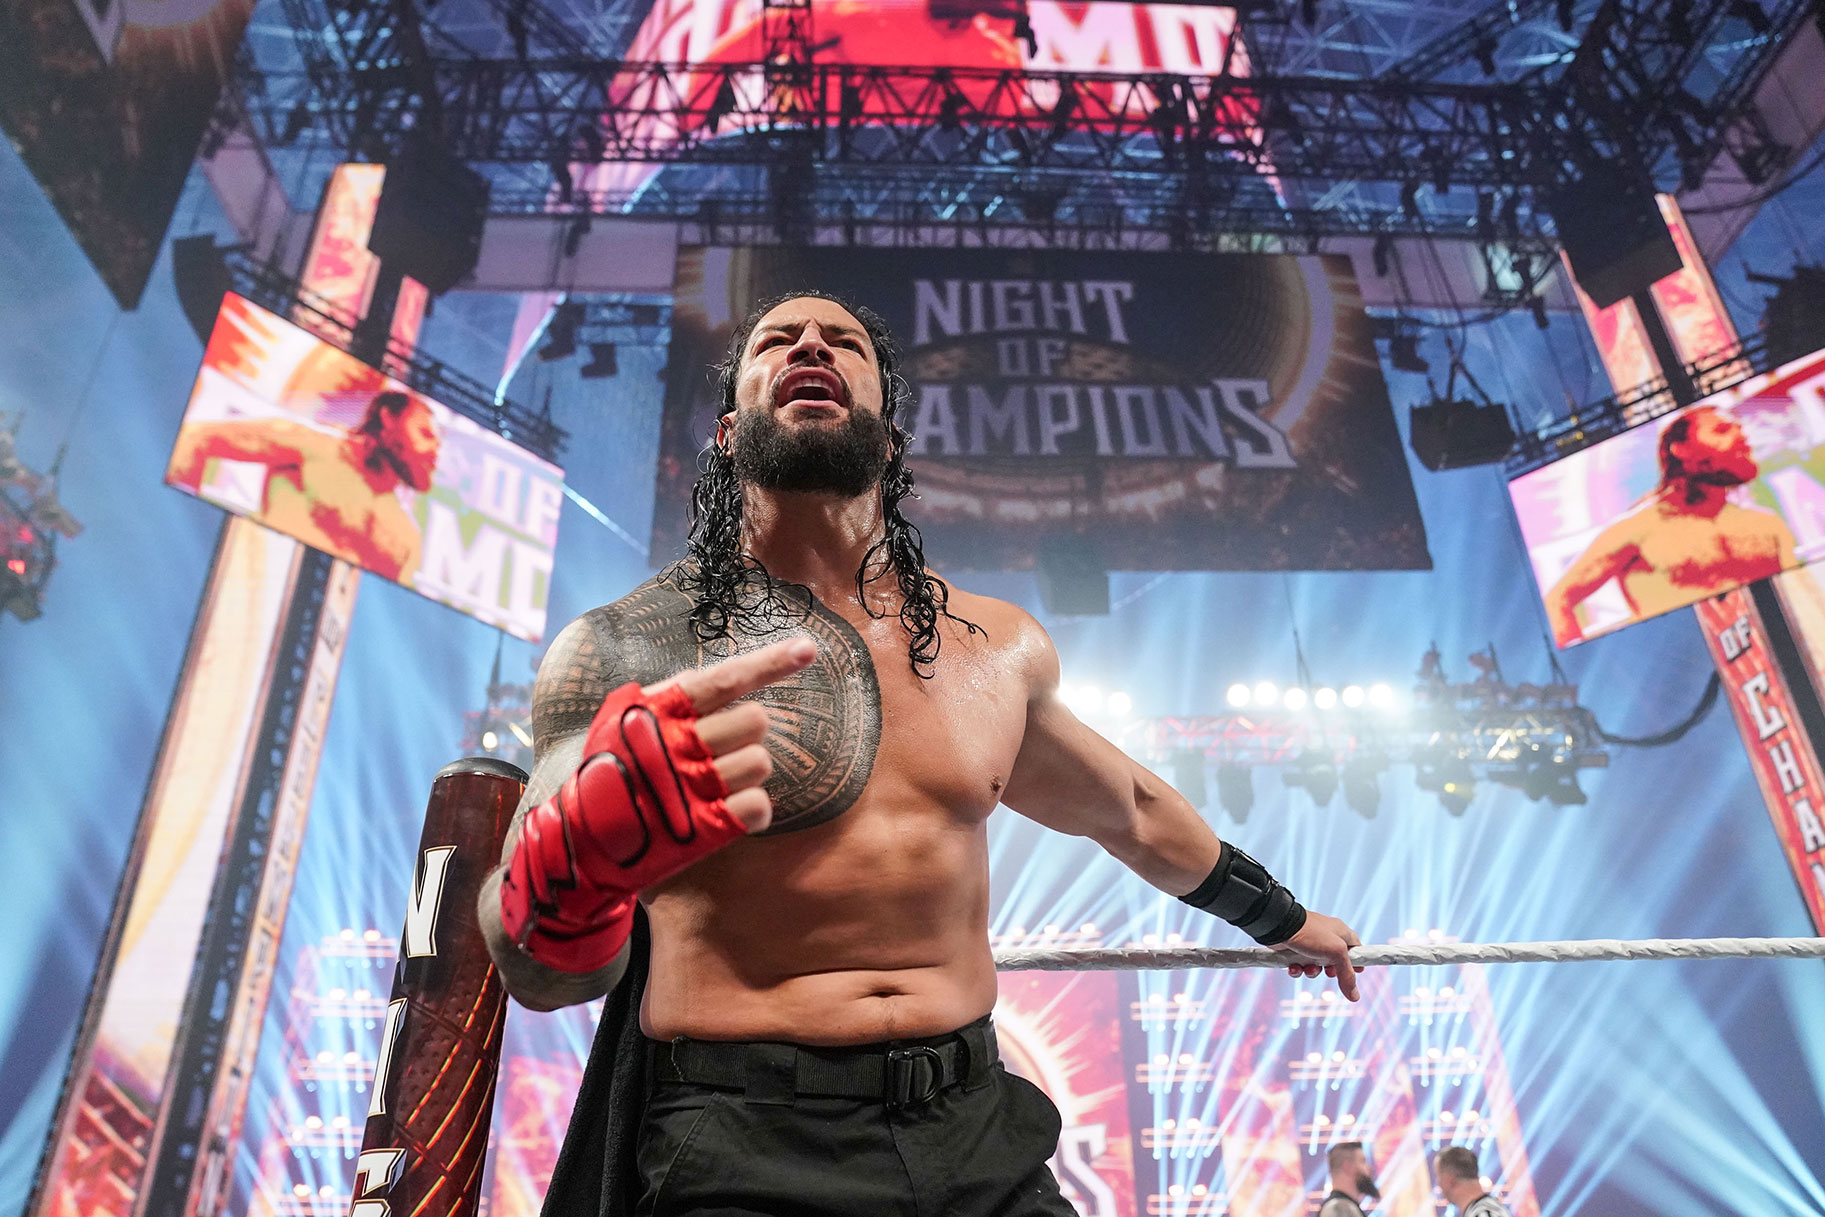 Roman Reigns in the ring at Night of Champions